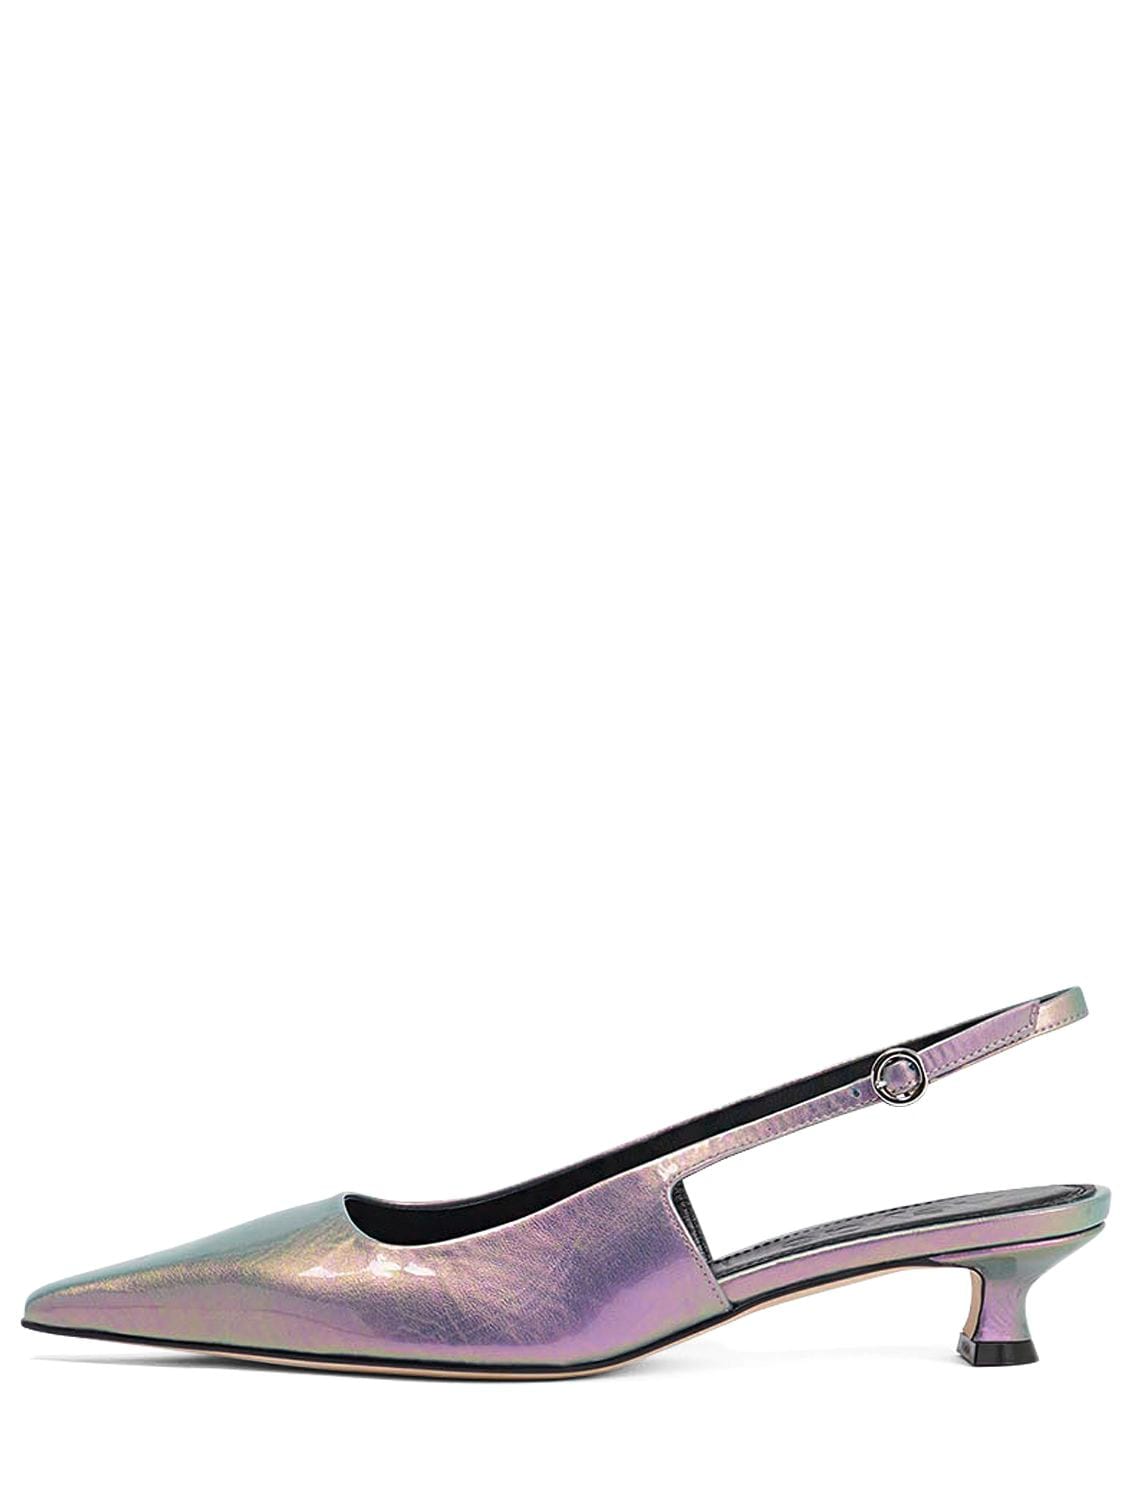 Aeyde Catrina Iridescent Leather Pumps